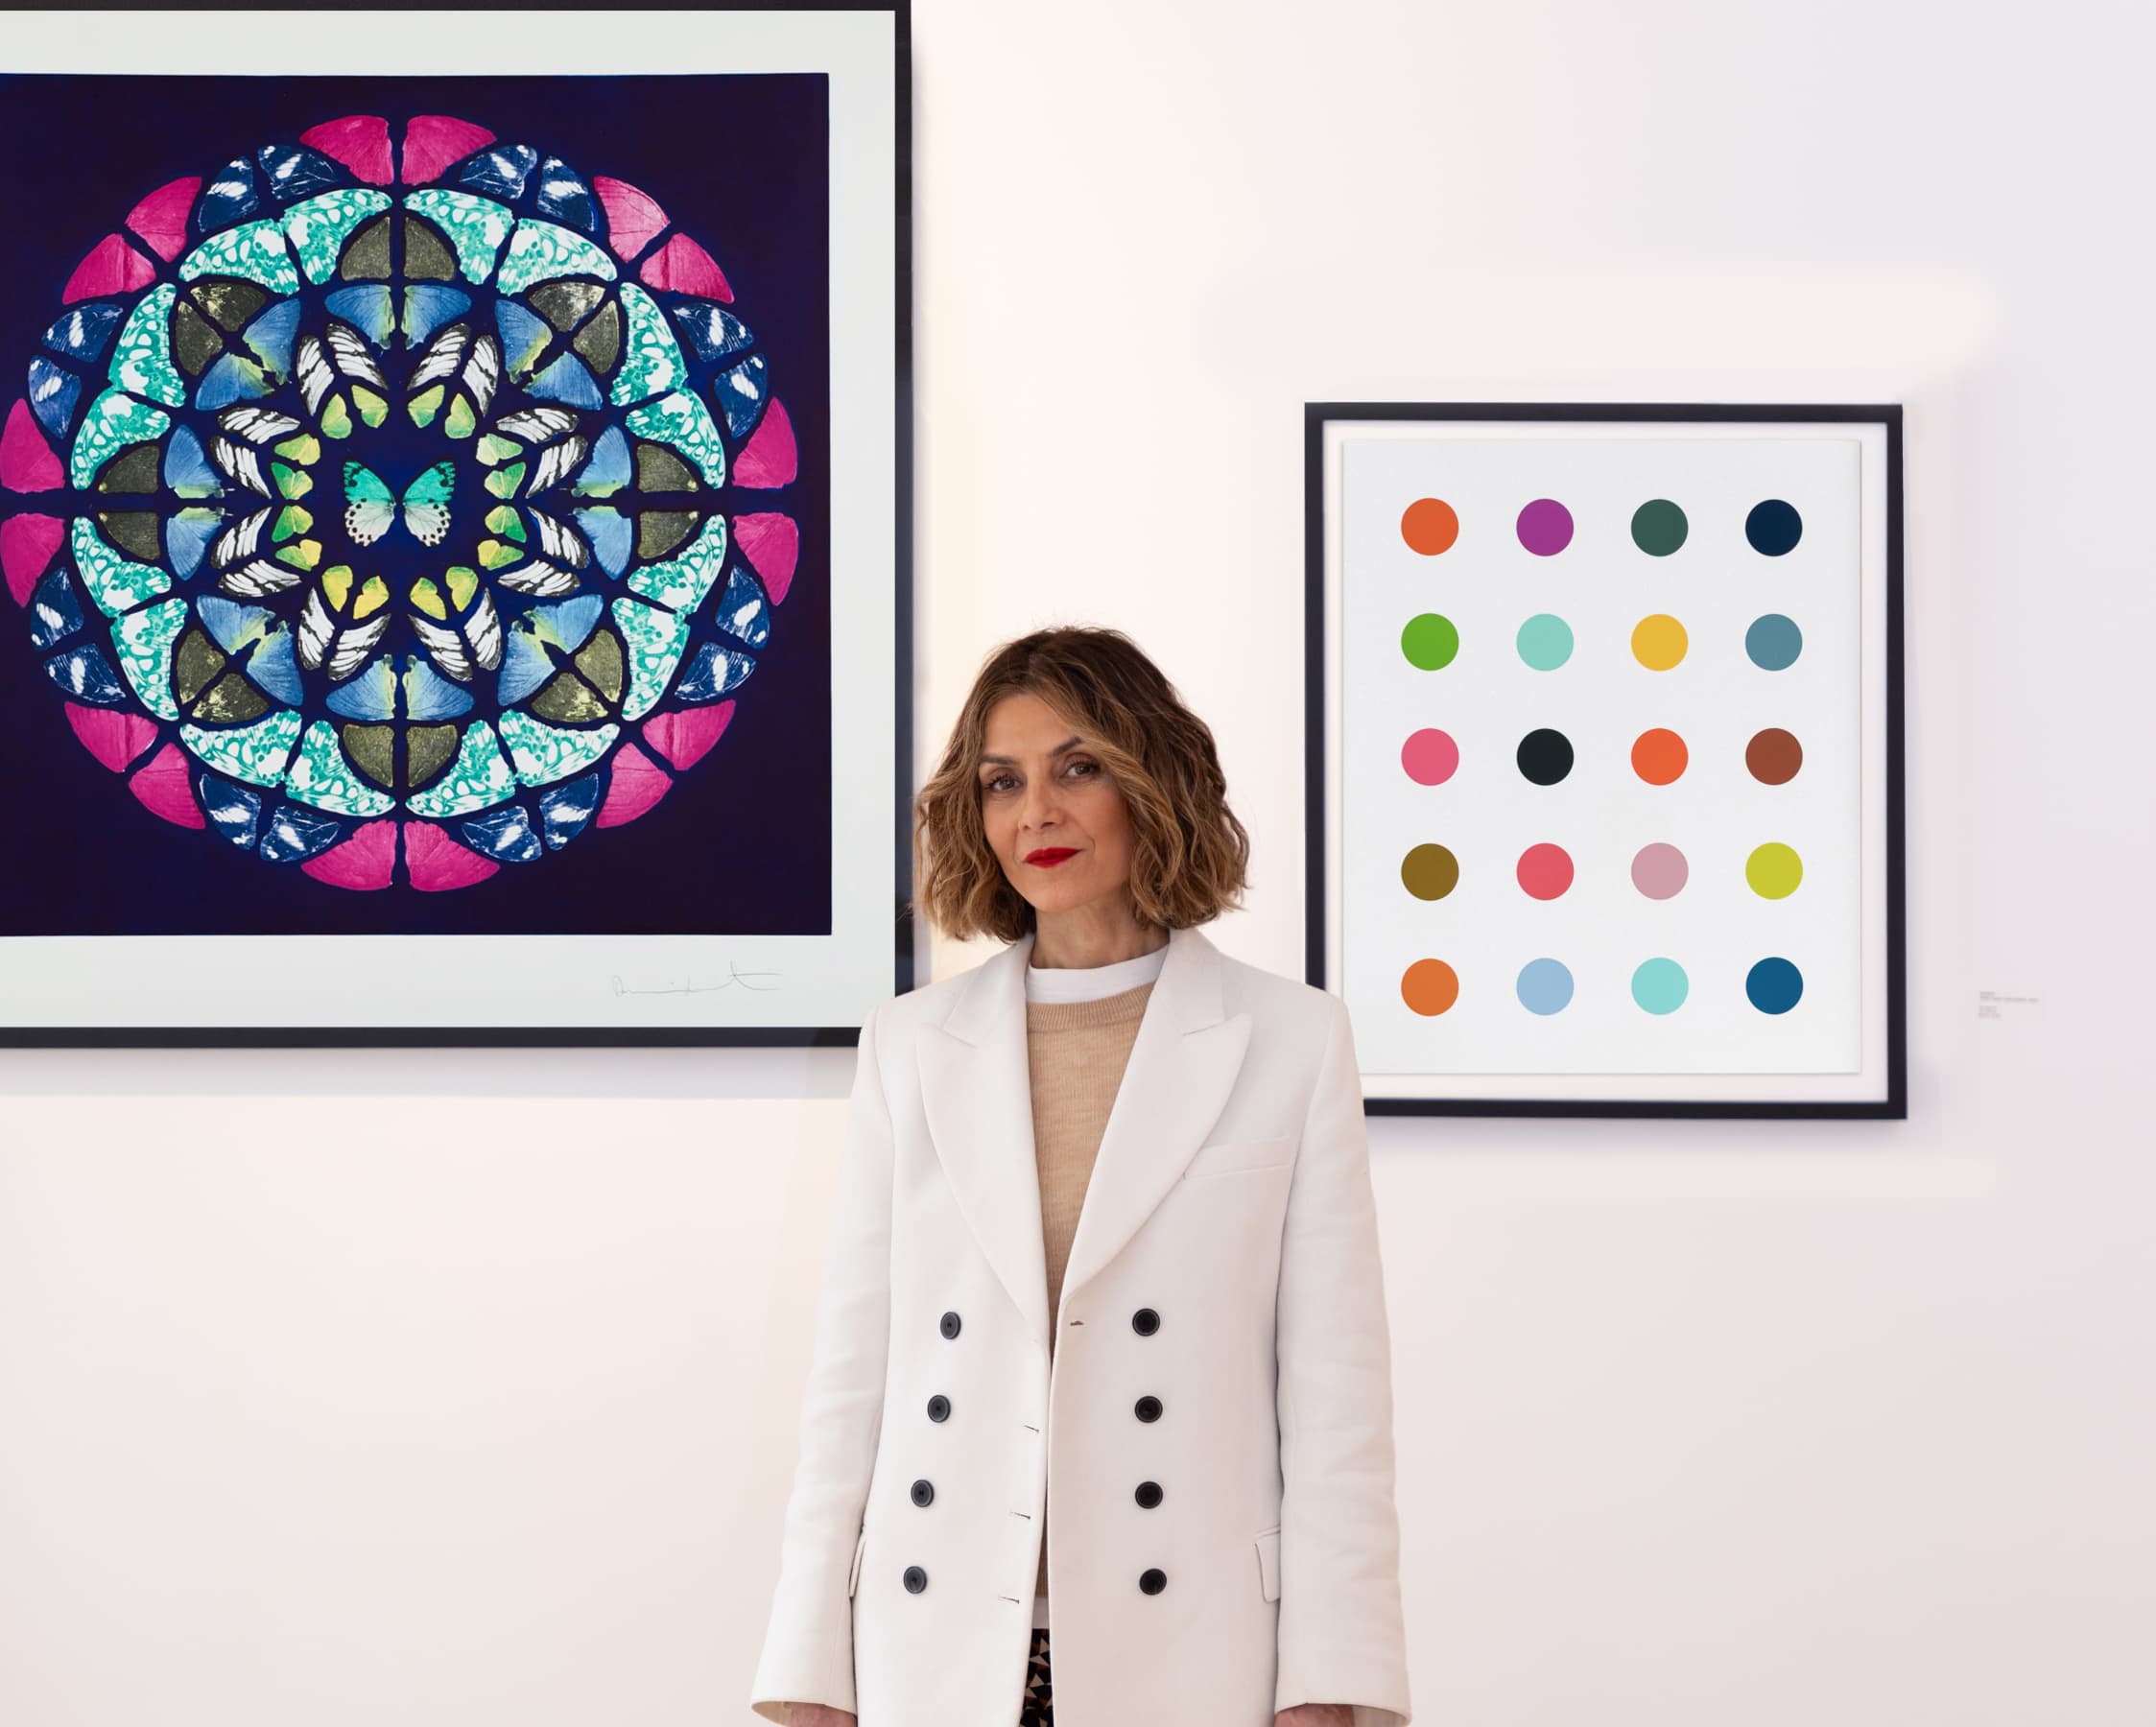 How to Build an Art Collection: Fi Lovett’s Picks of Noteworthy Artists for the Seasoned Art Collector